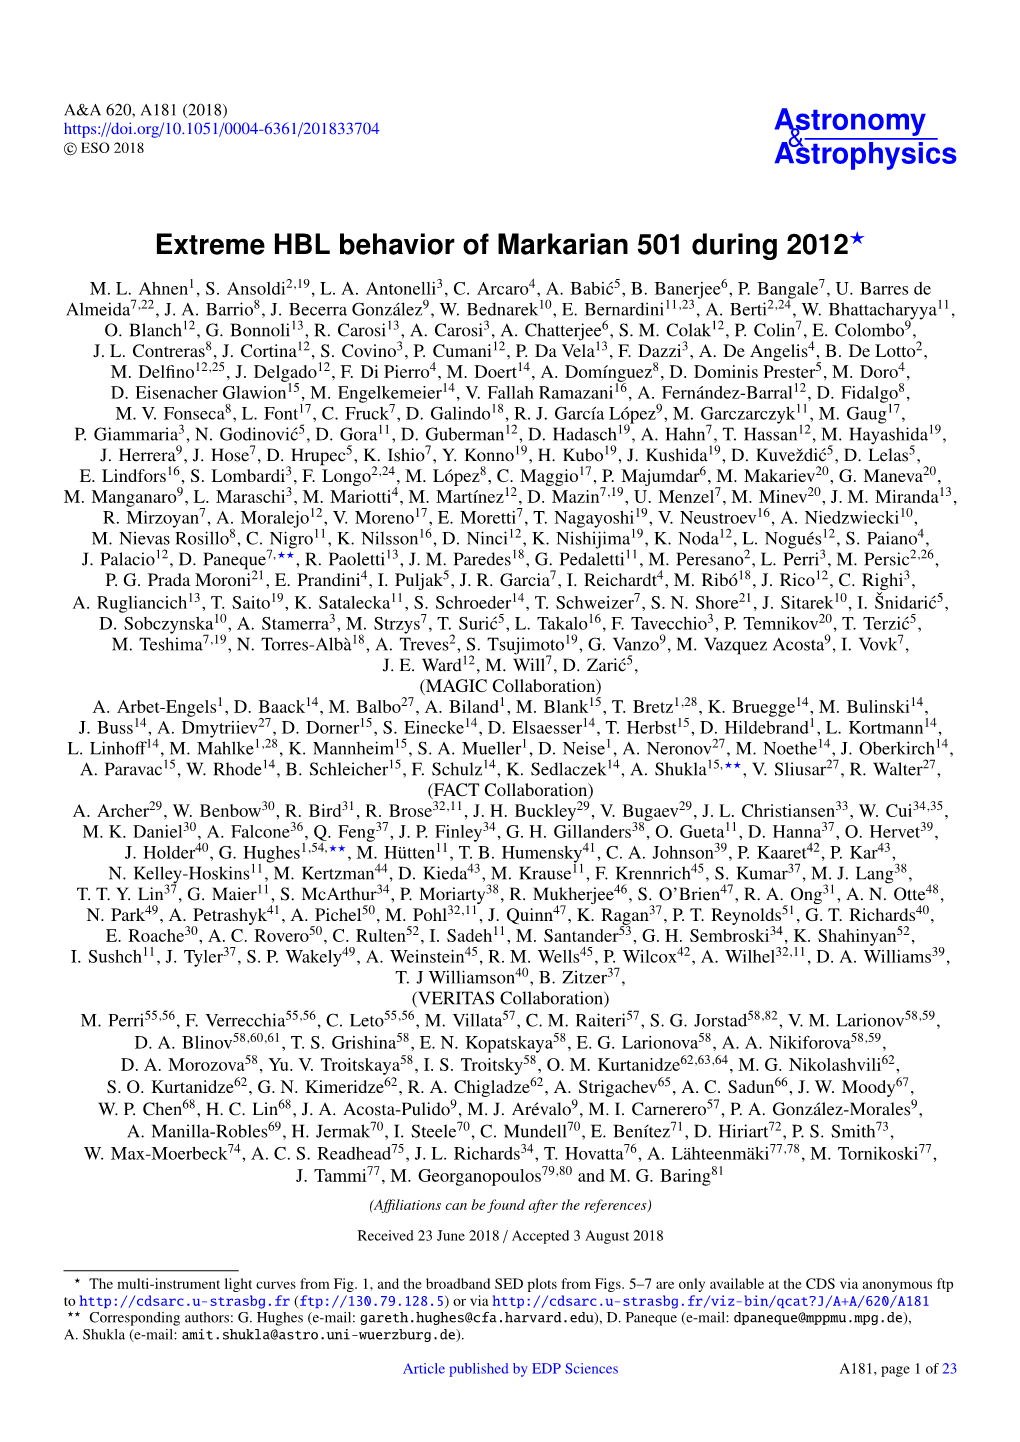 Extreme HBL Behavior of Markarian 501 During 2012?